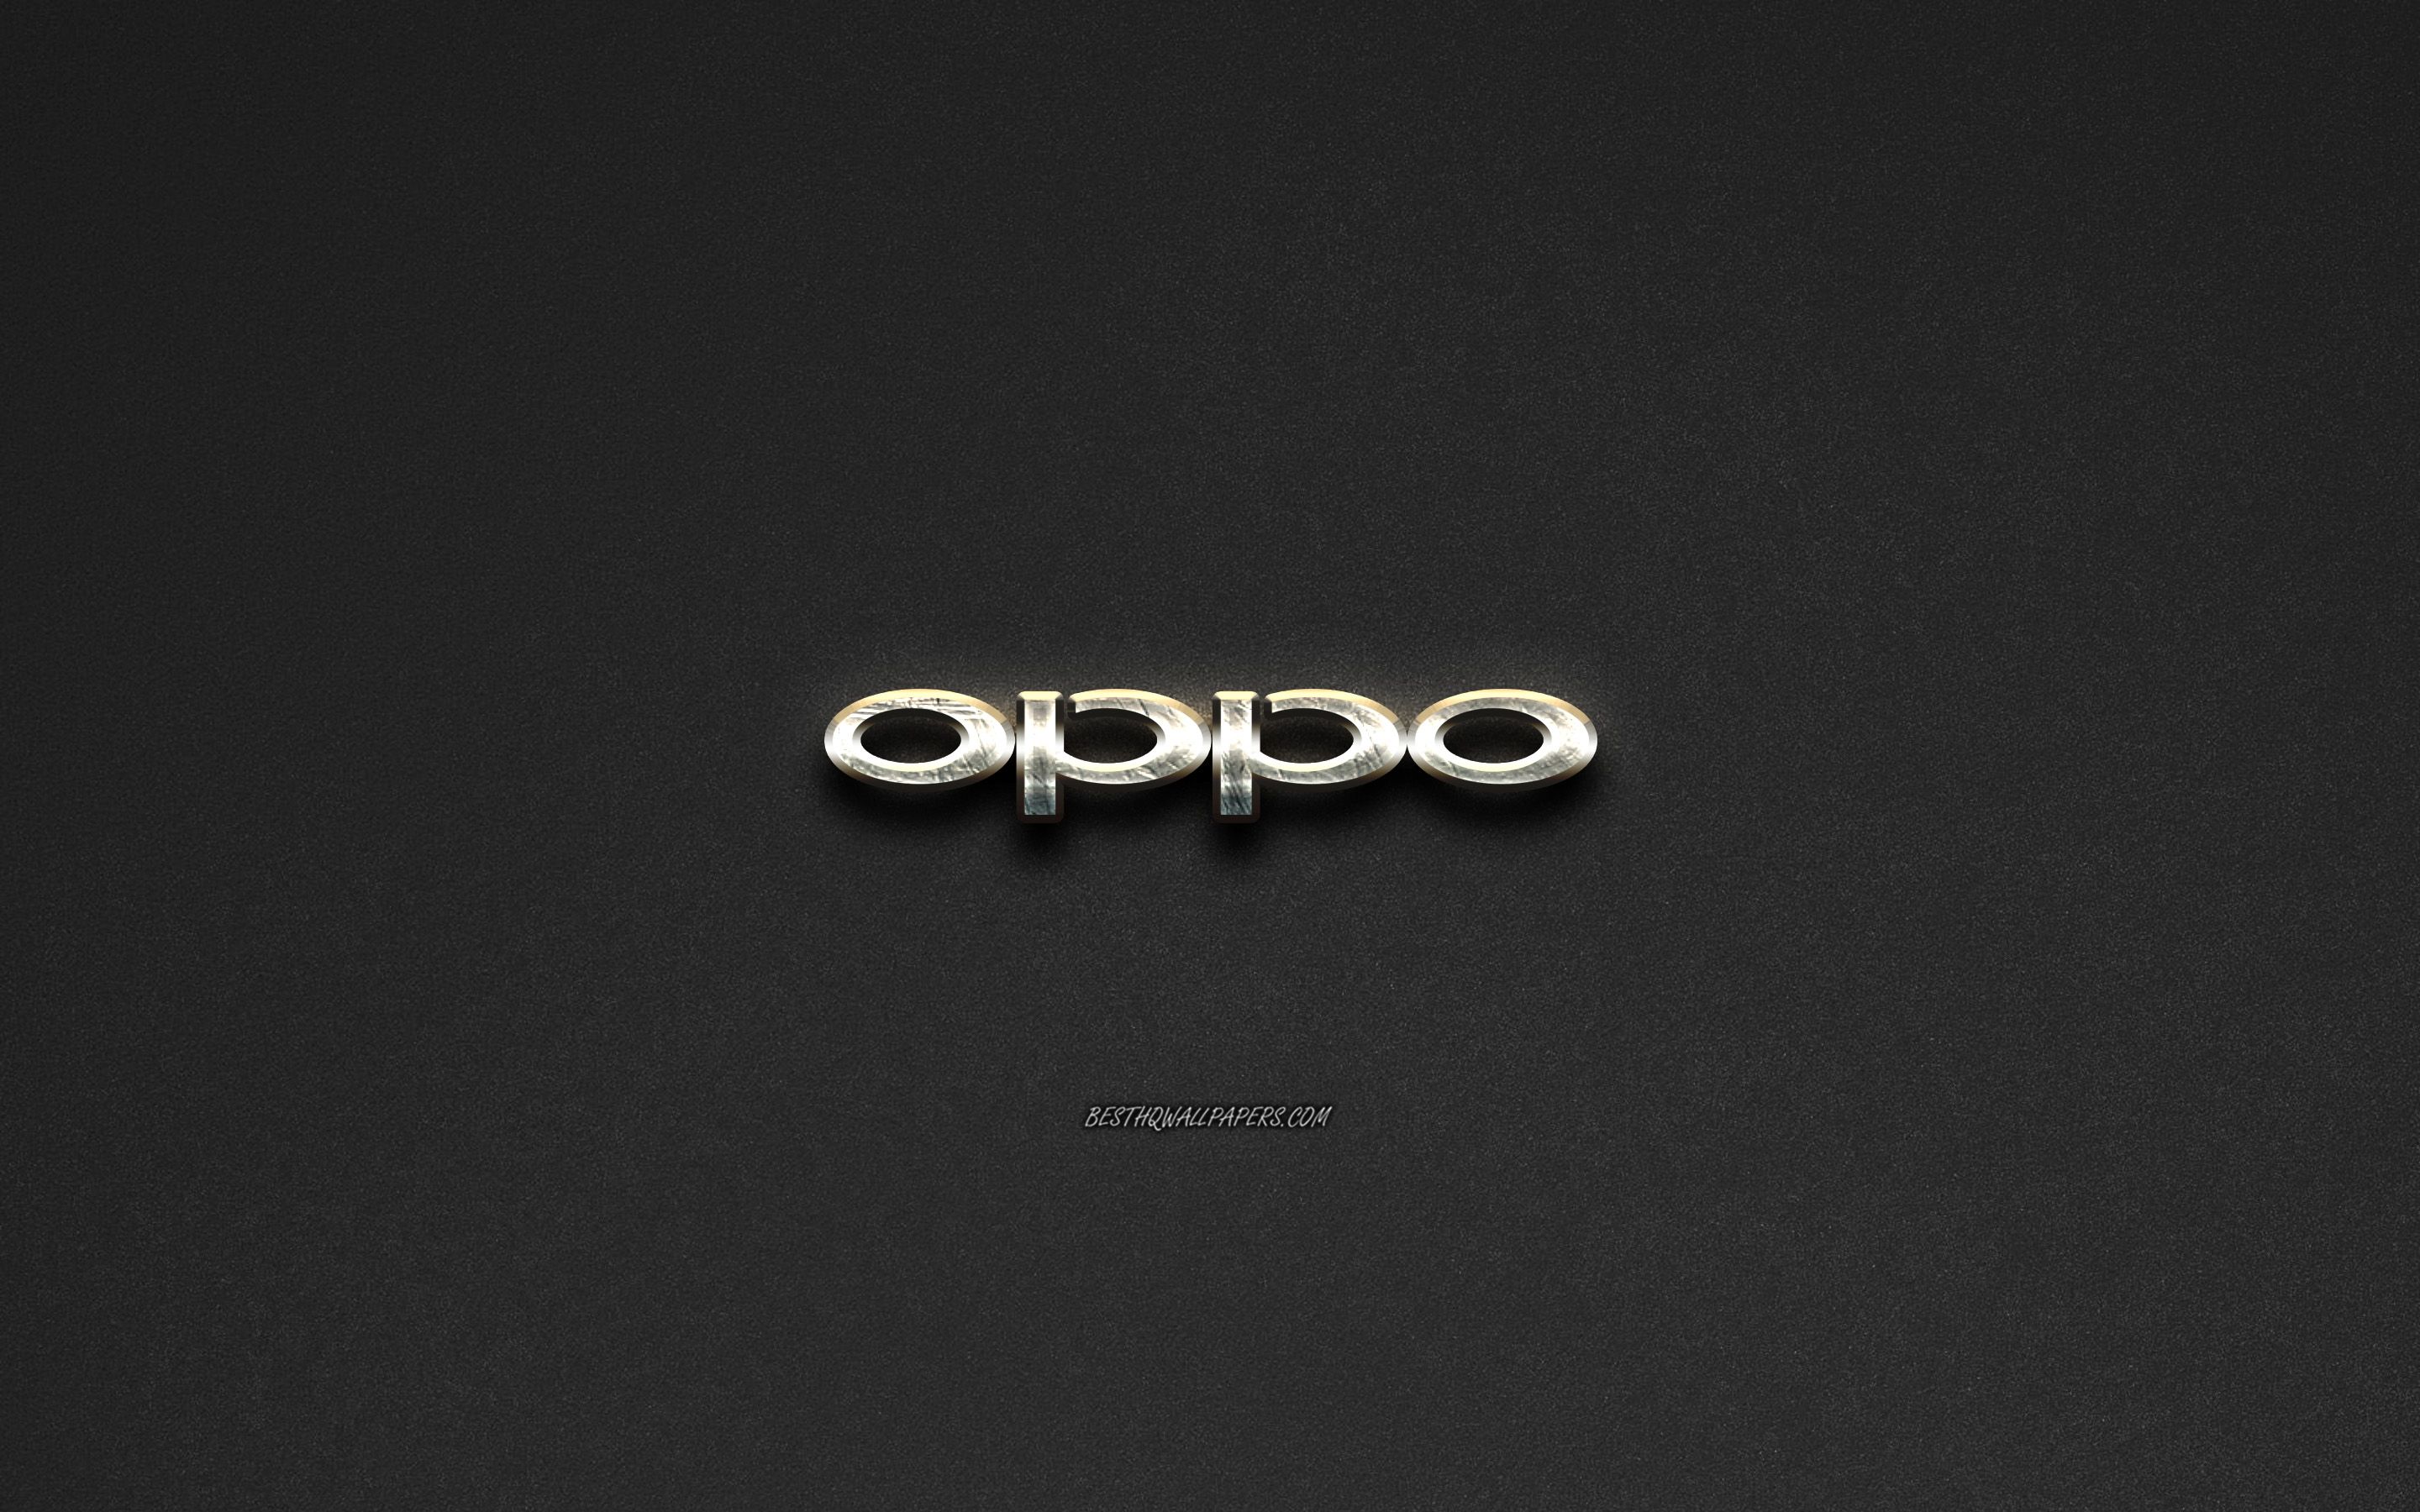 Oppo Logo Wallpapers - Wallpaper Cave